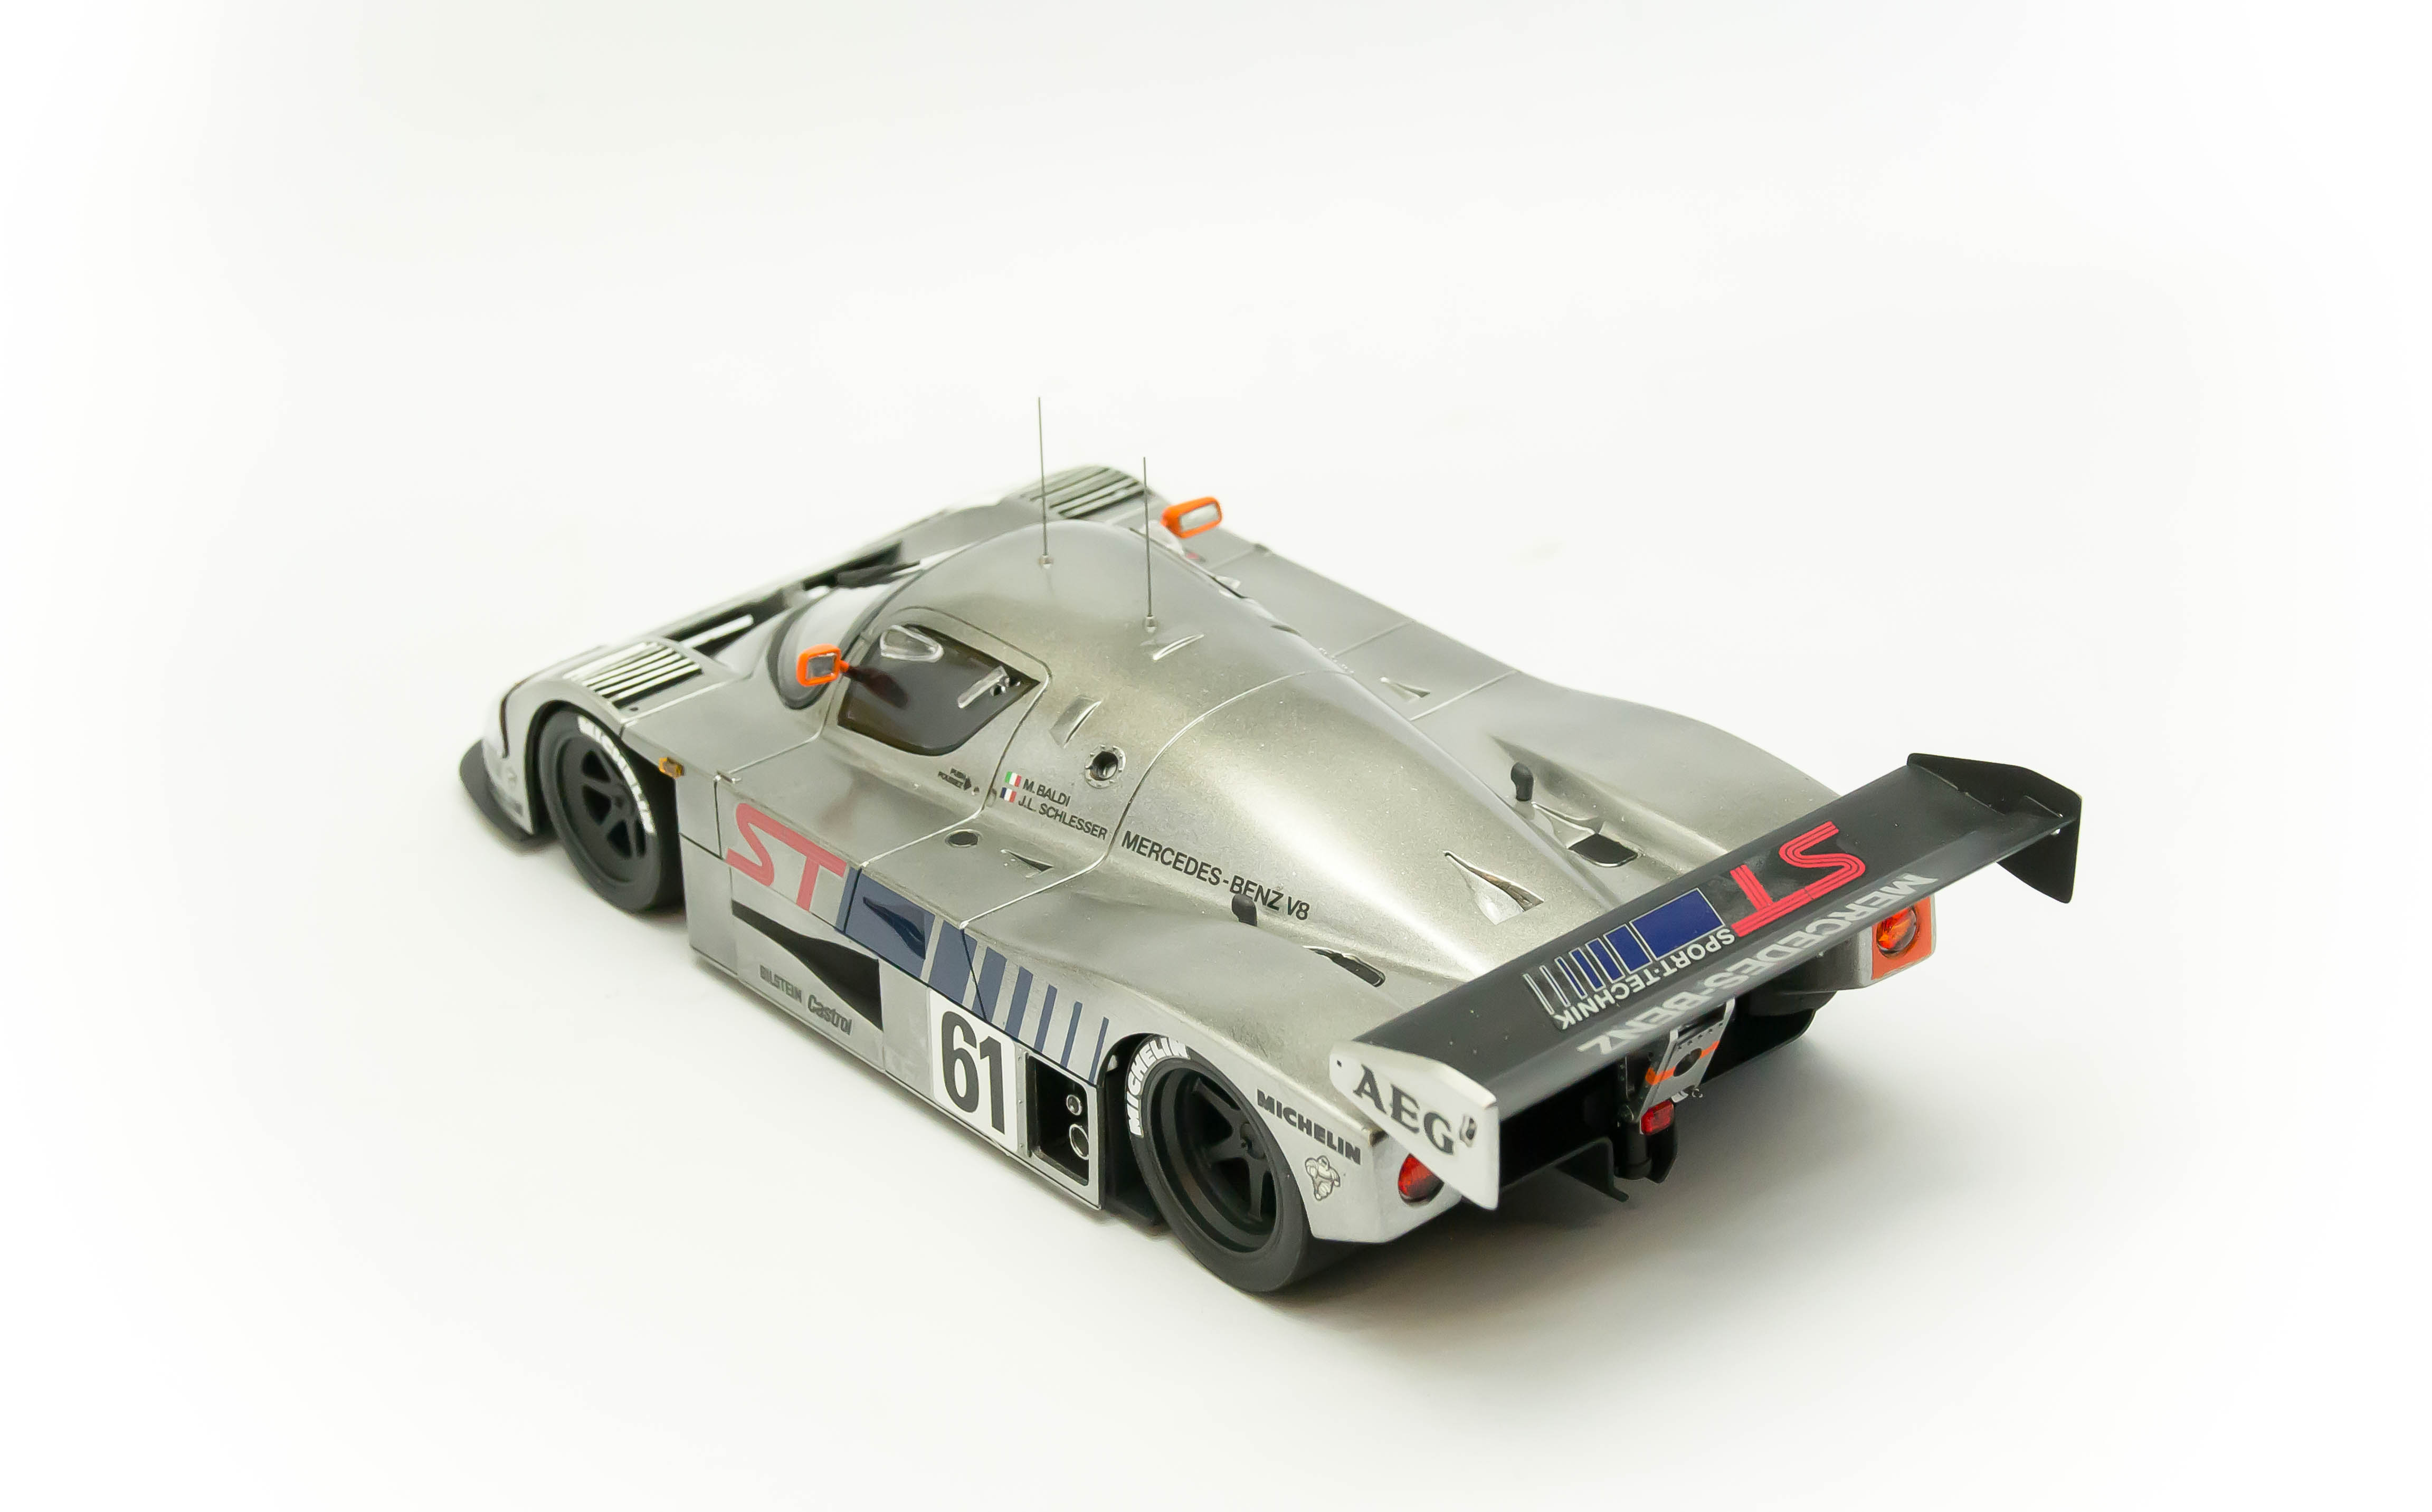 Hasegawa 20373 Sauber MERCEDES C9 1987 Kit 1/24 Scale for sale online 